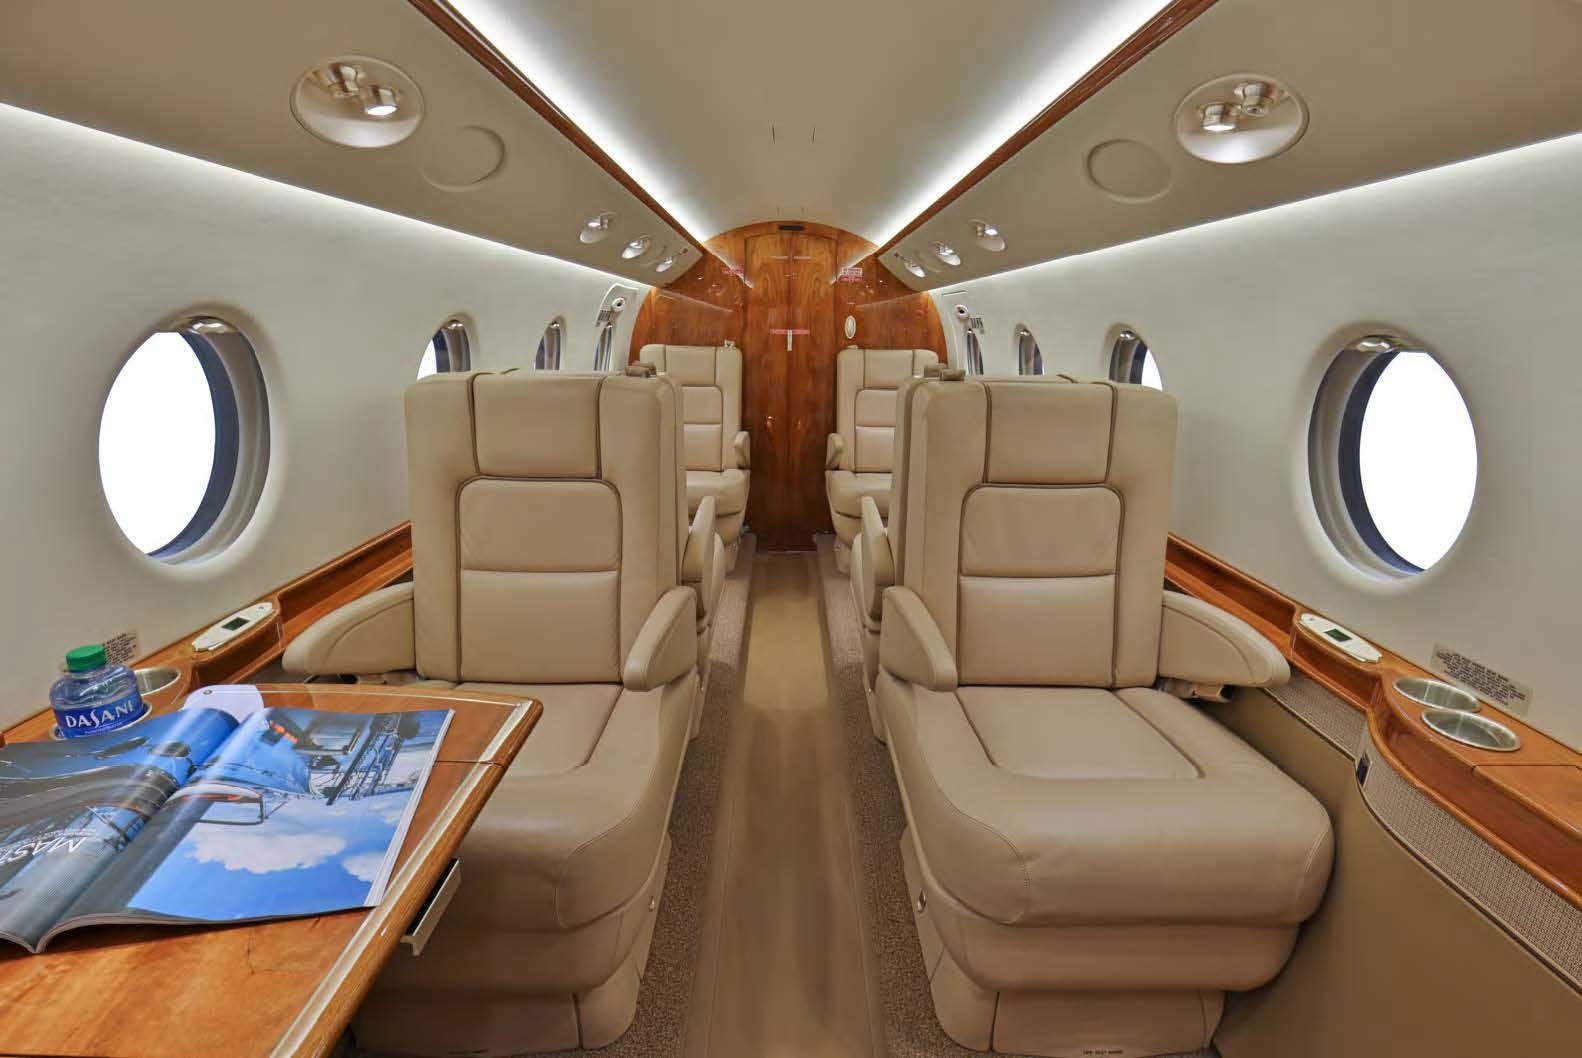 2016 GULFSTREAM G150 - Completion & Refurbishment - Your Aircraft Interior in Detail